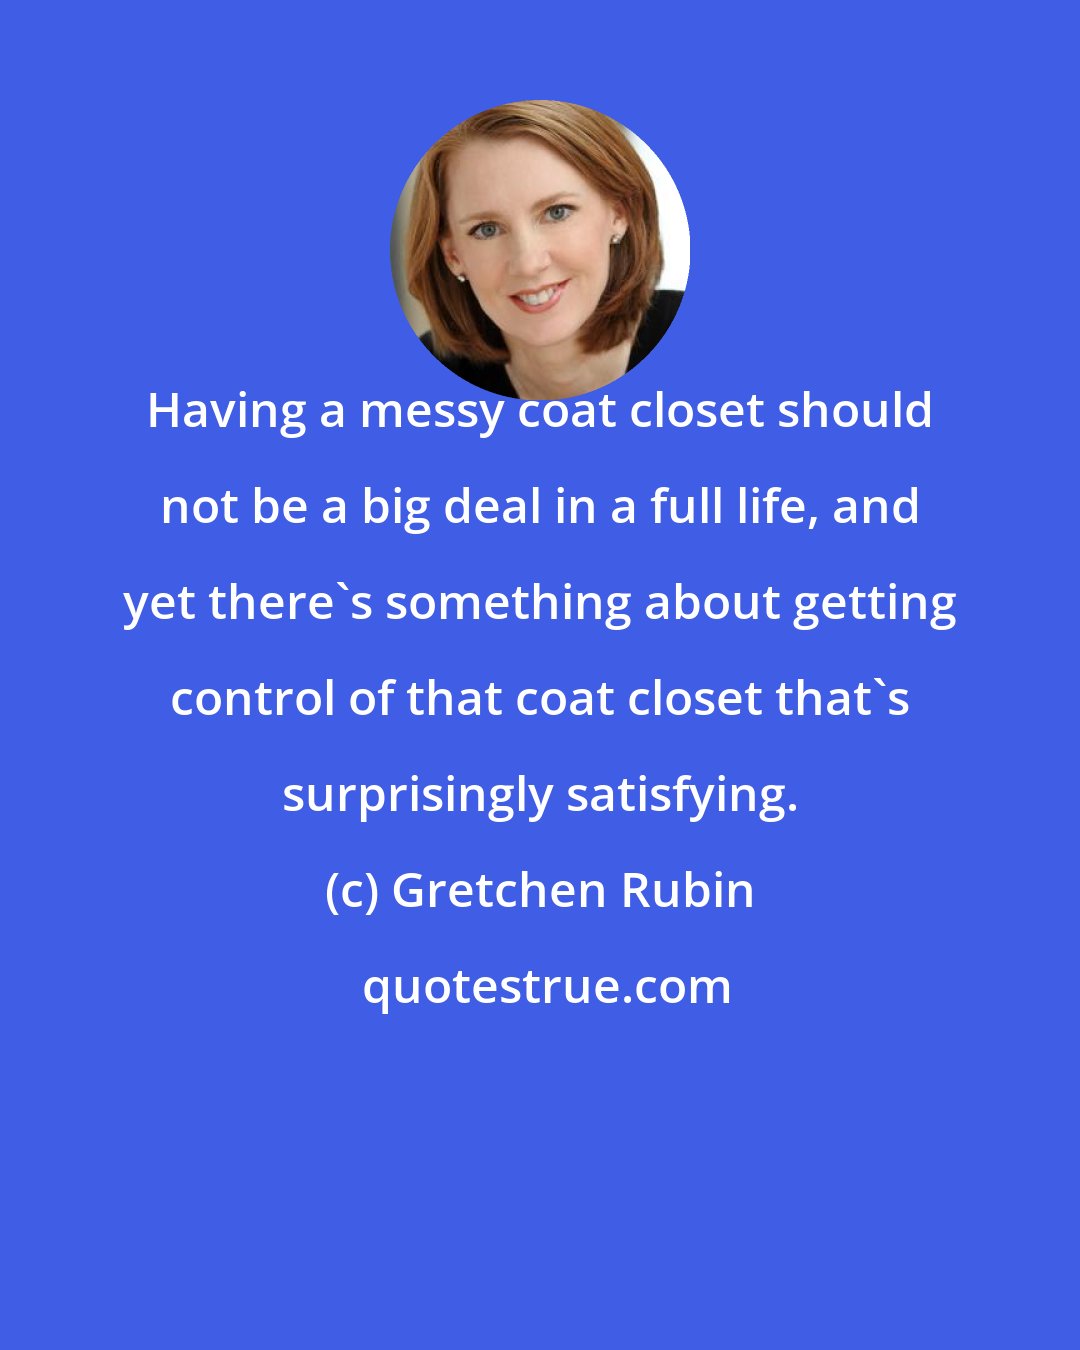 Gretchen Rubin: Having a messy coat closet should not be a big deal in a full life, and yet there's something about getting control of that coat closet that's surprisingly satisfying.